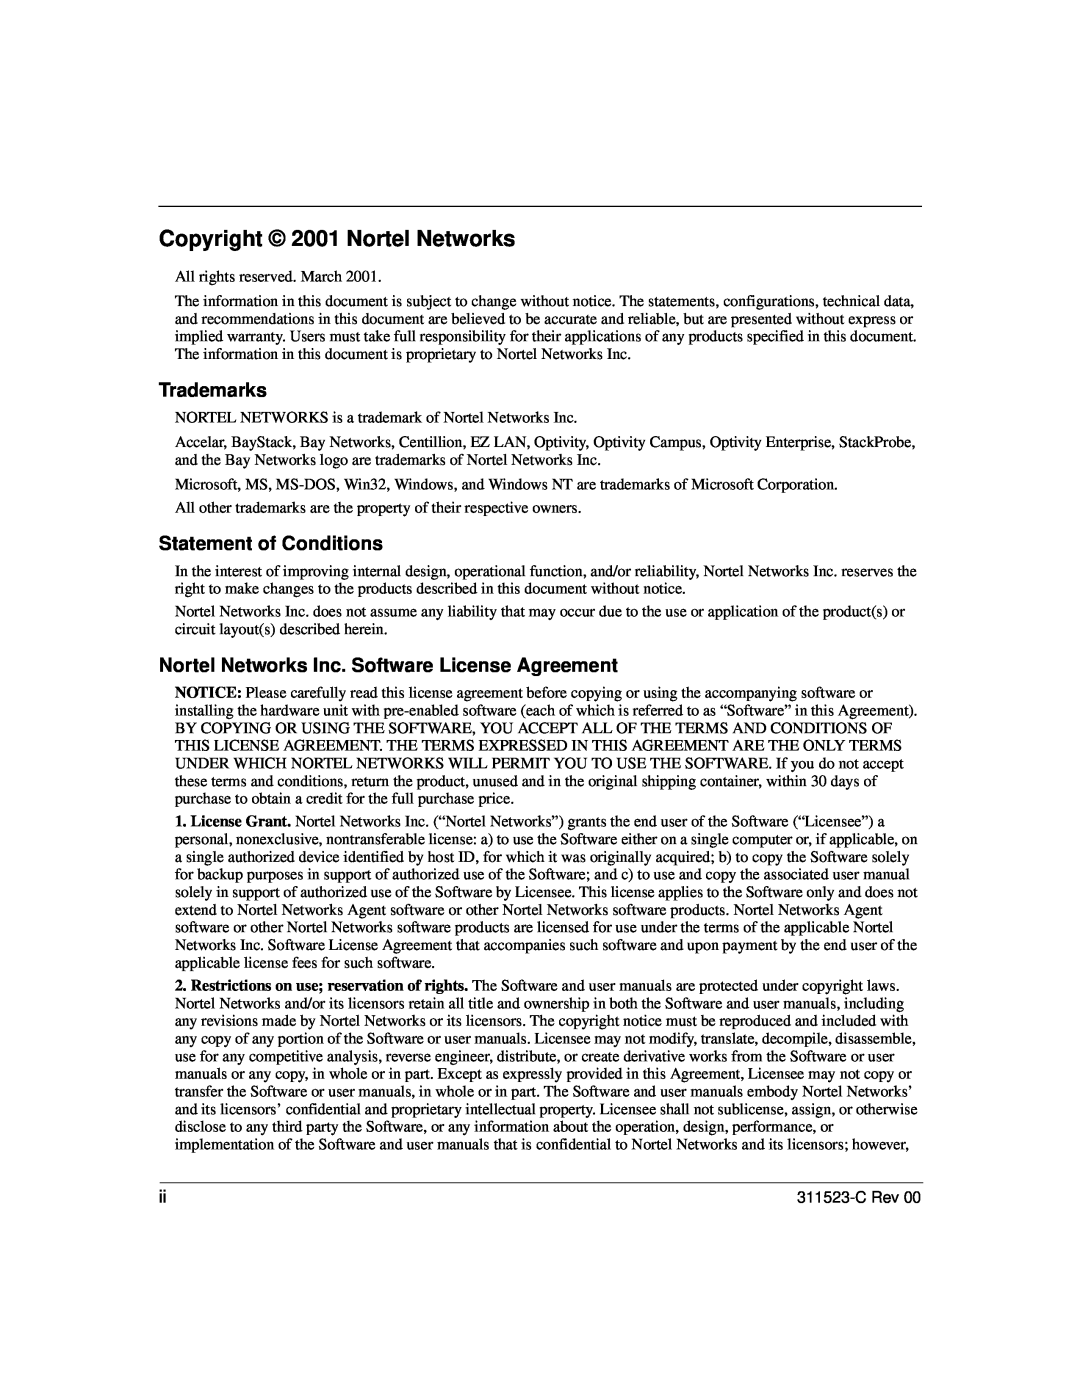 Nortel Networks 100 manual Copyright 2001 Nortel Networks, Trademarks, Statement of Conditions 